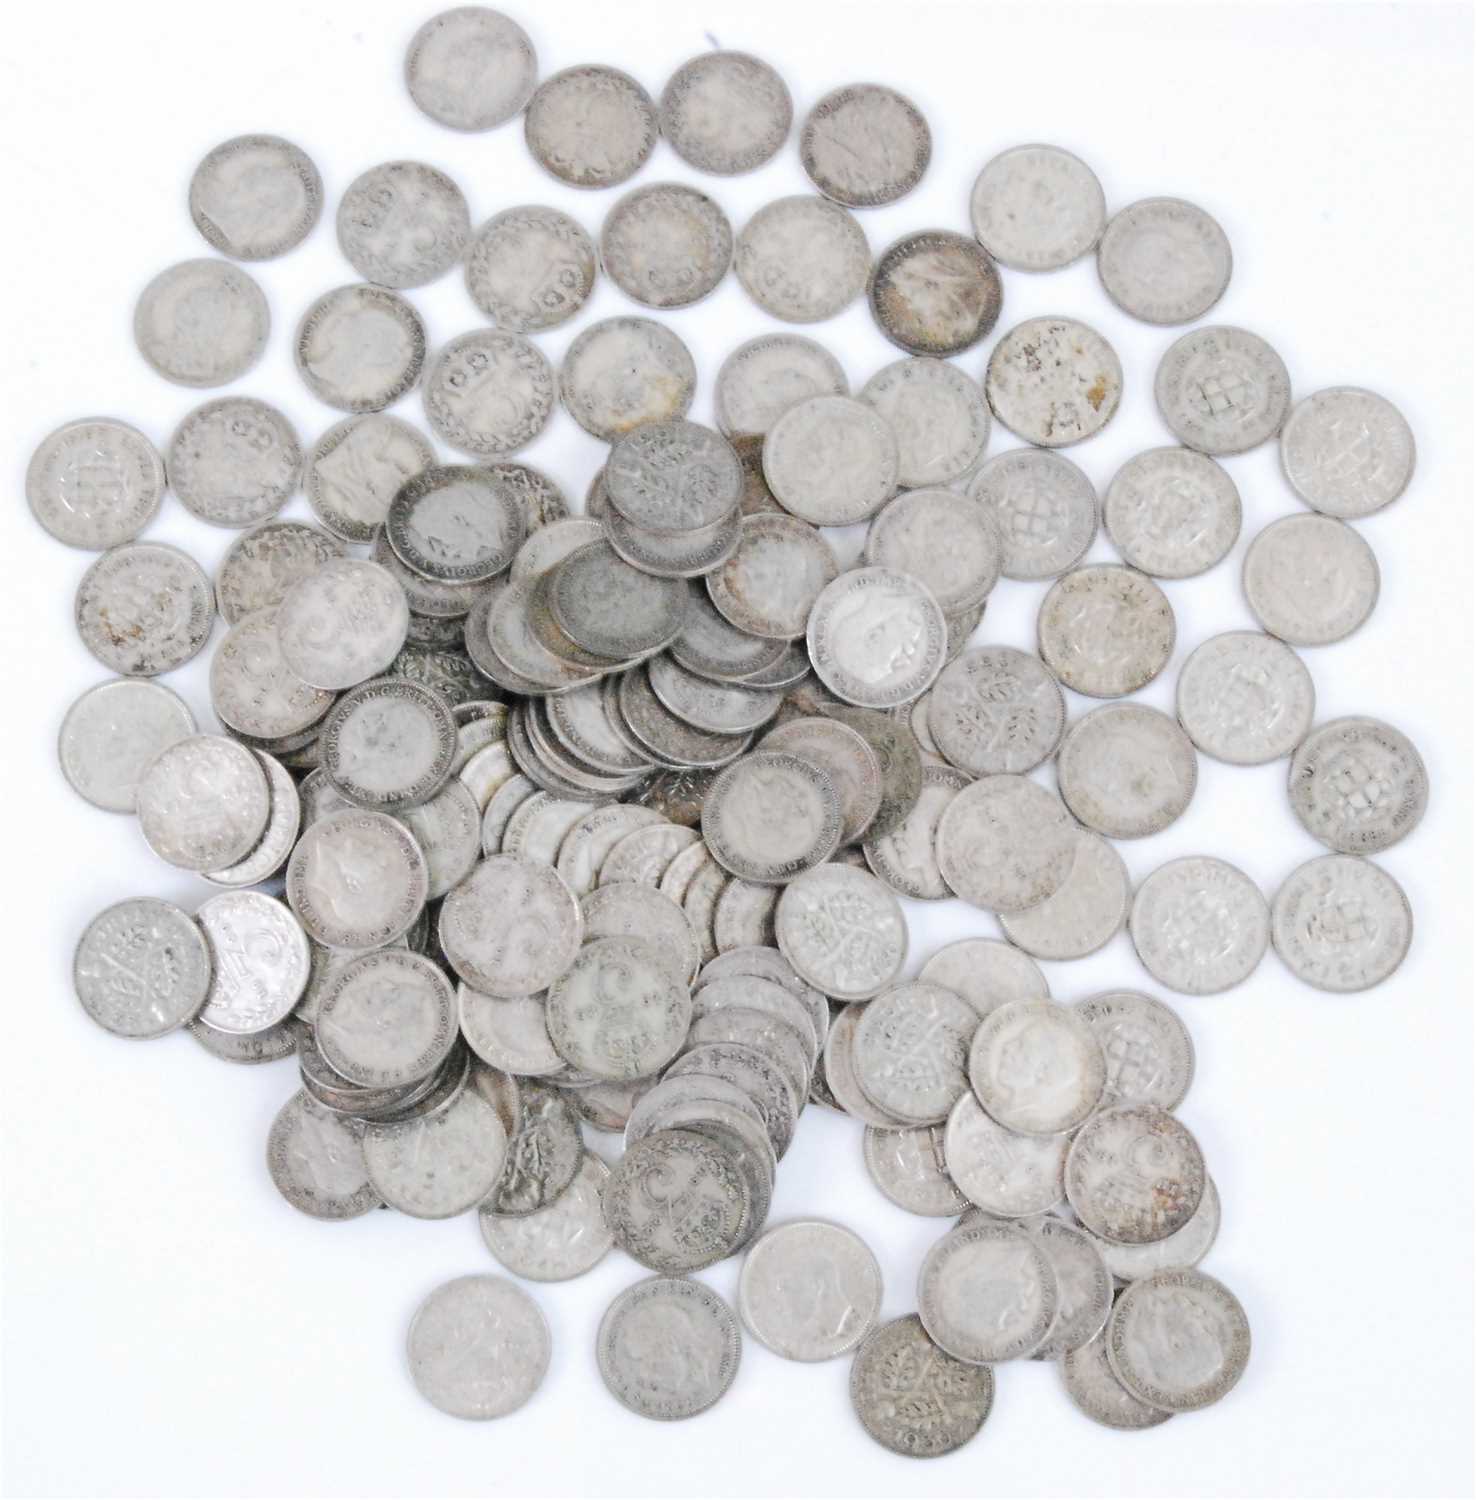 Lot 2080 - Great Britian, a large collection of silver threepence coins